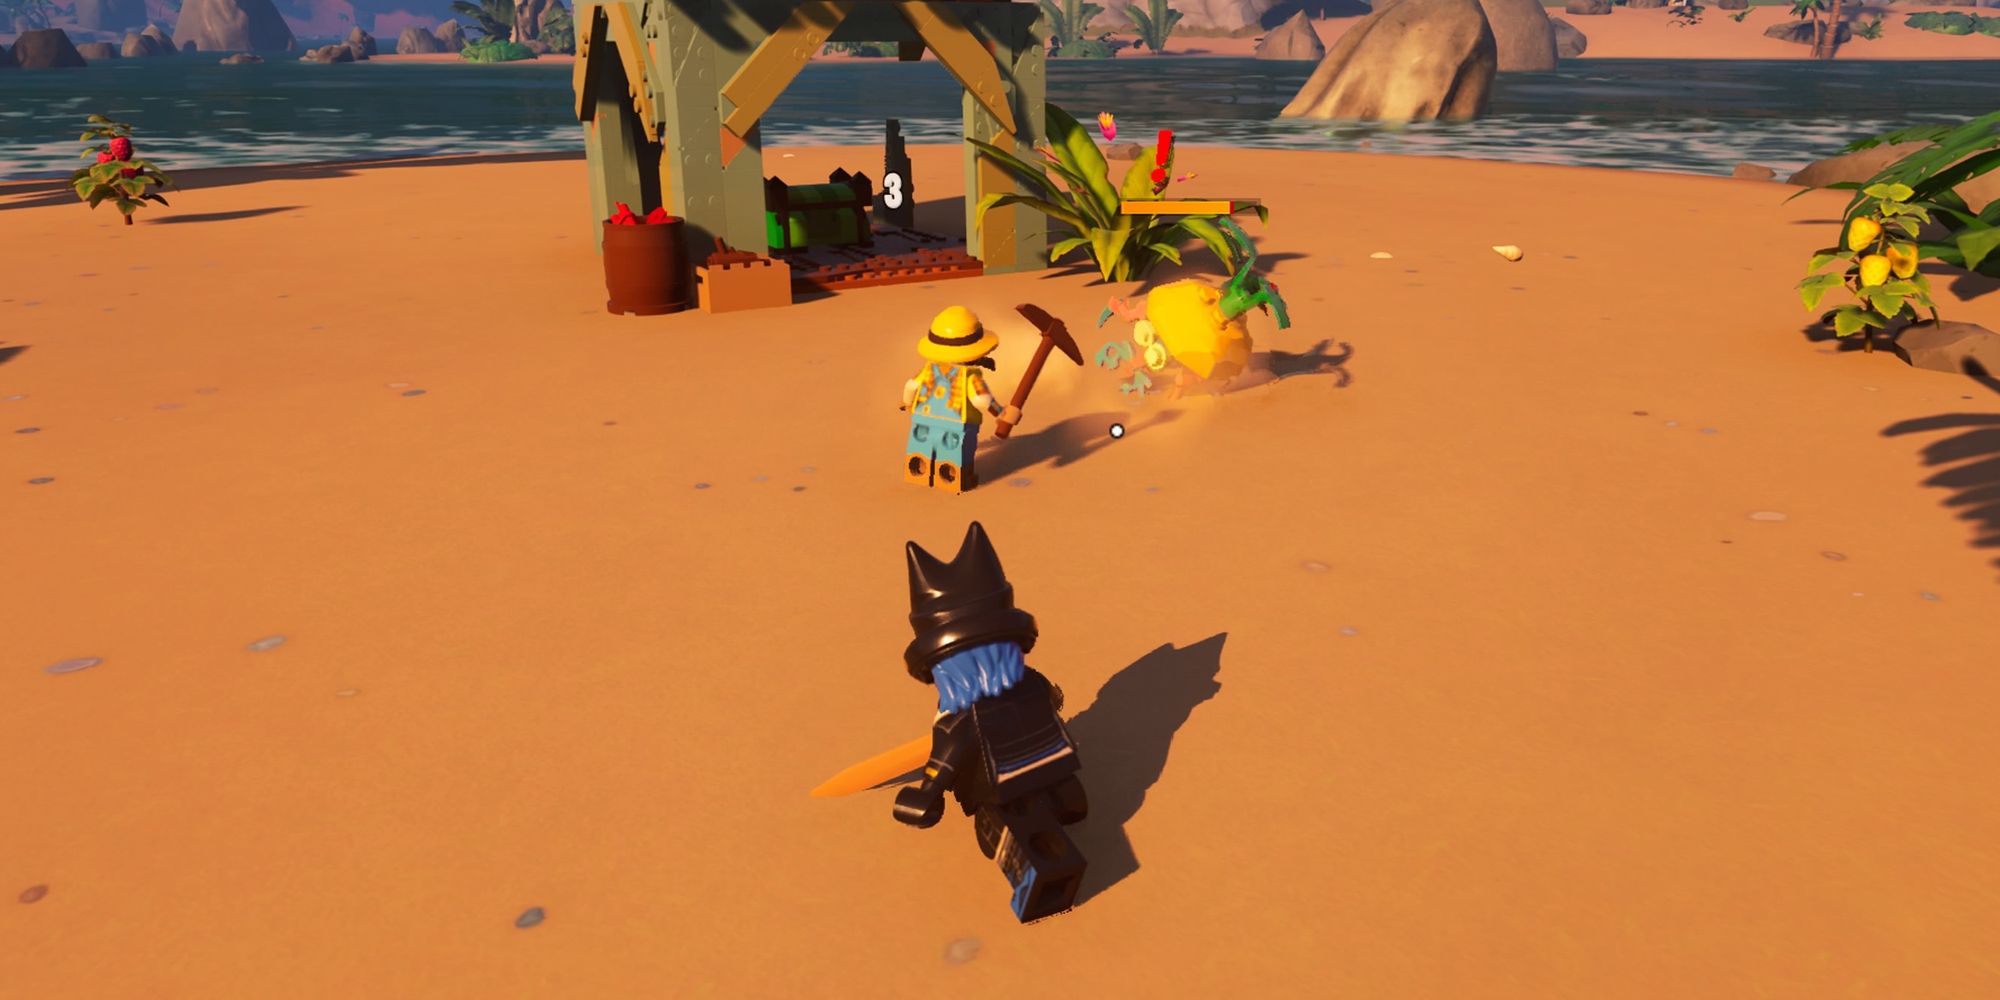 Two characters attacking a Sand Roller in Fortnite.